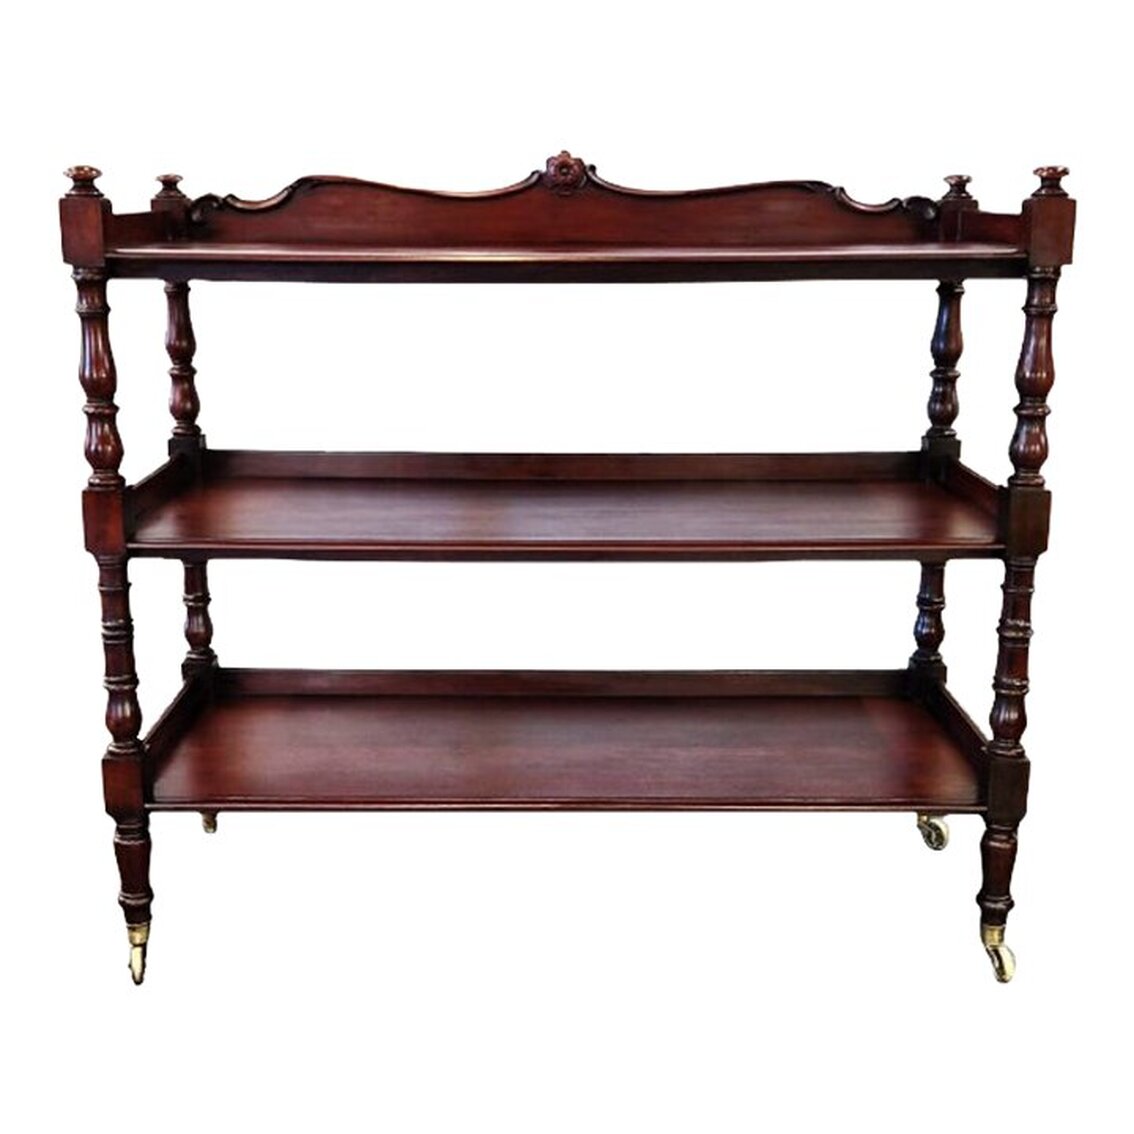 Antique circa 1820s-1830s food server is constructed of Caribbean mahogany wood and has three lipped shelves, four turned legs topped with knob finials ending in brass sabot casters, and a curved back rail with a central carved flower roundel.